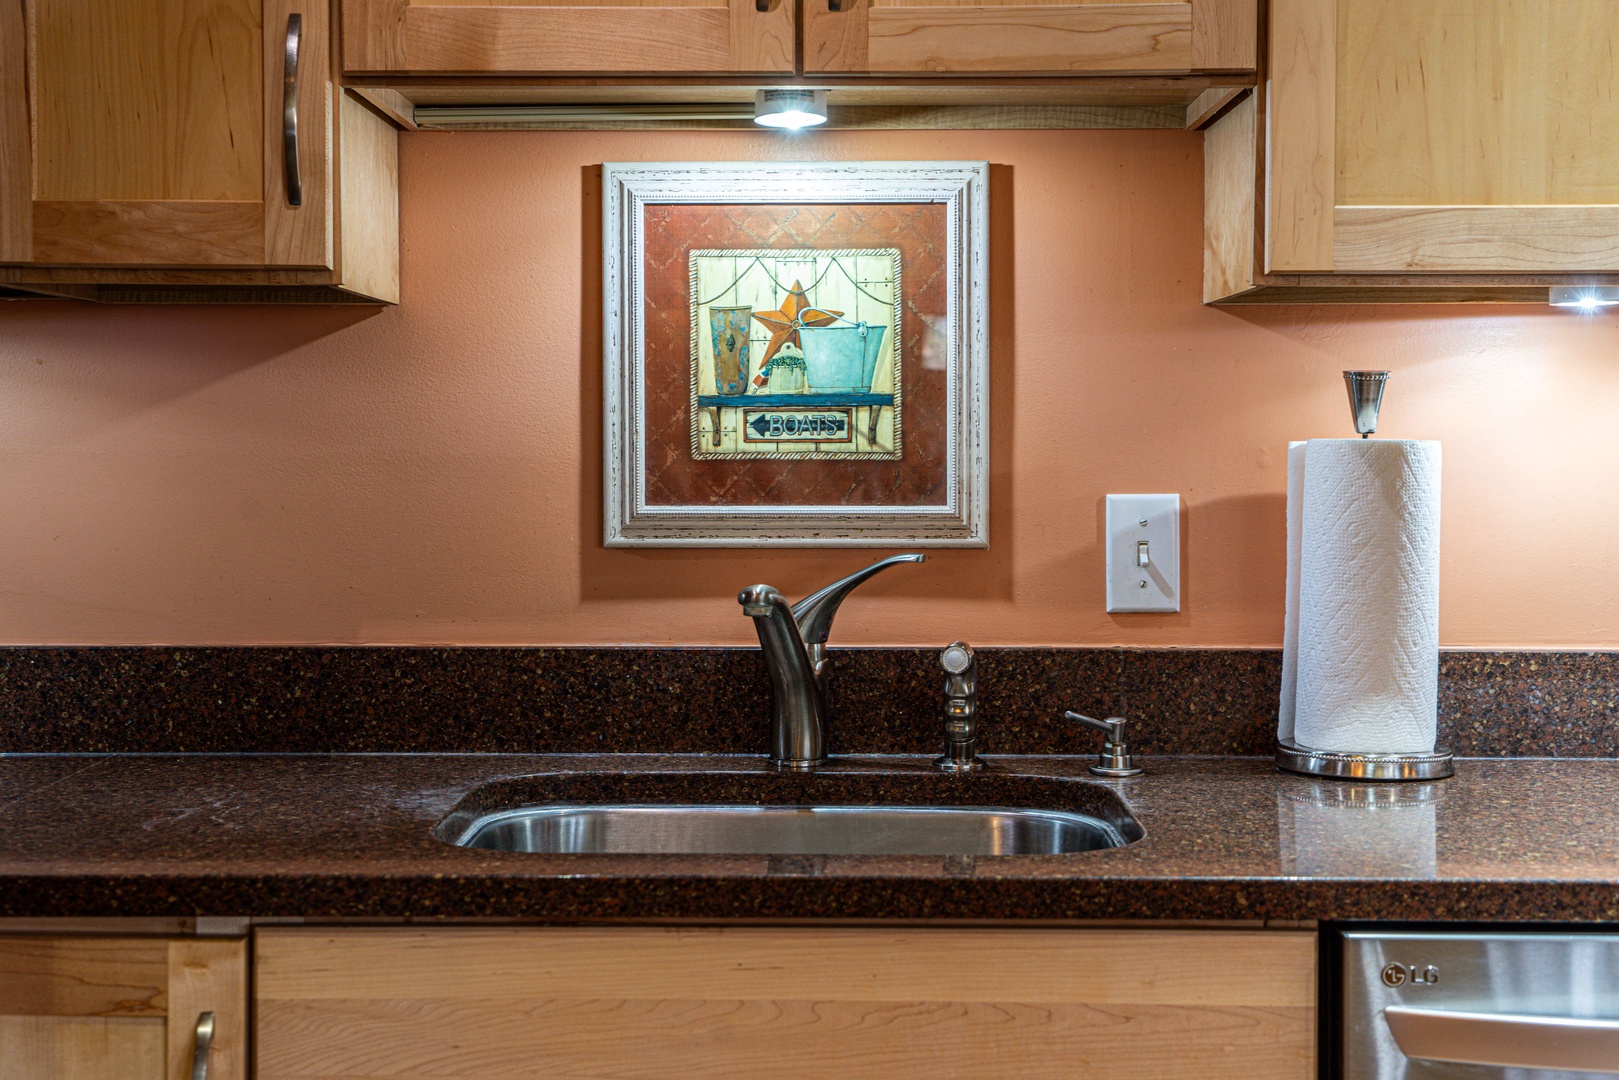 The open kitchen is spacious & offers all the comforts of home